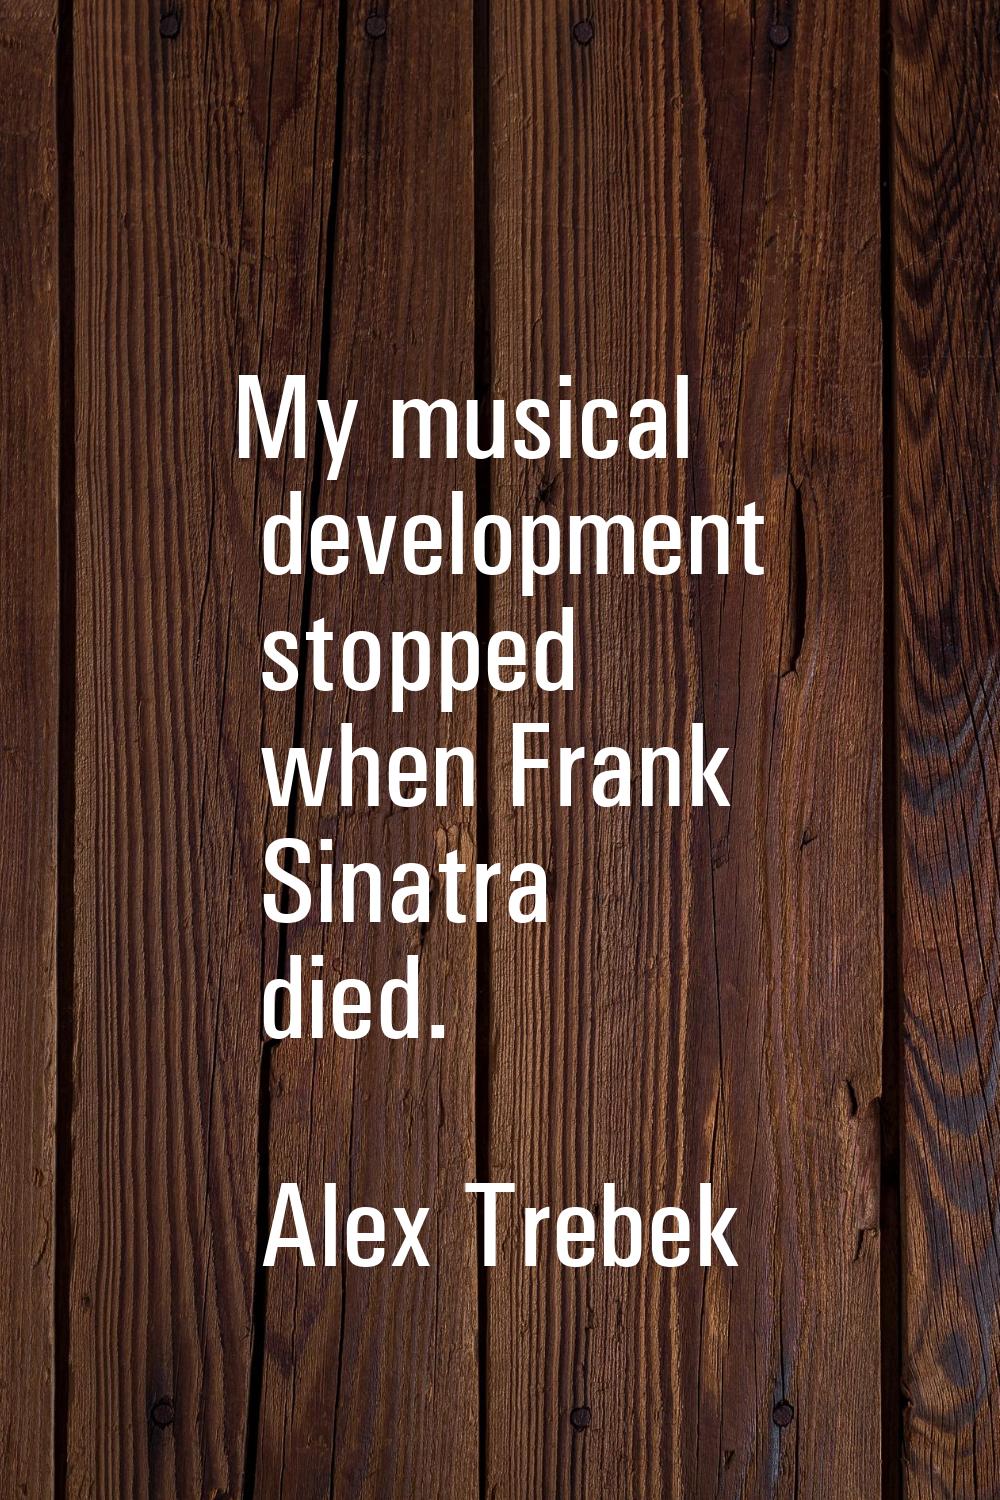 My musical development stopped when Frank Sinatra died.